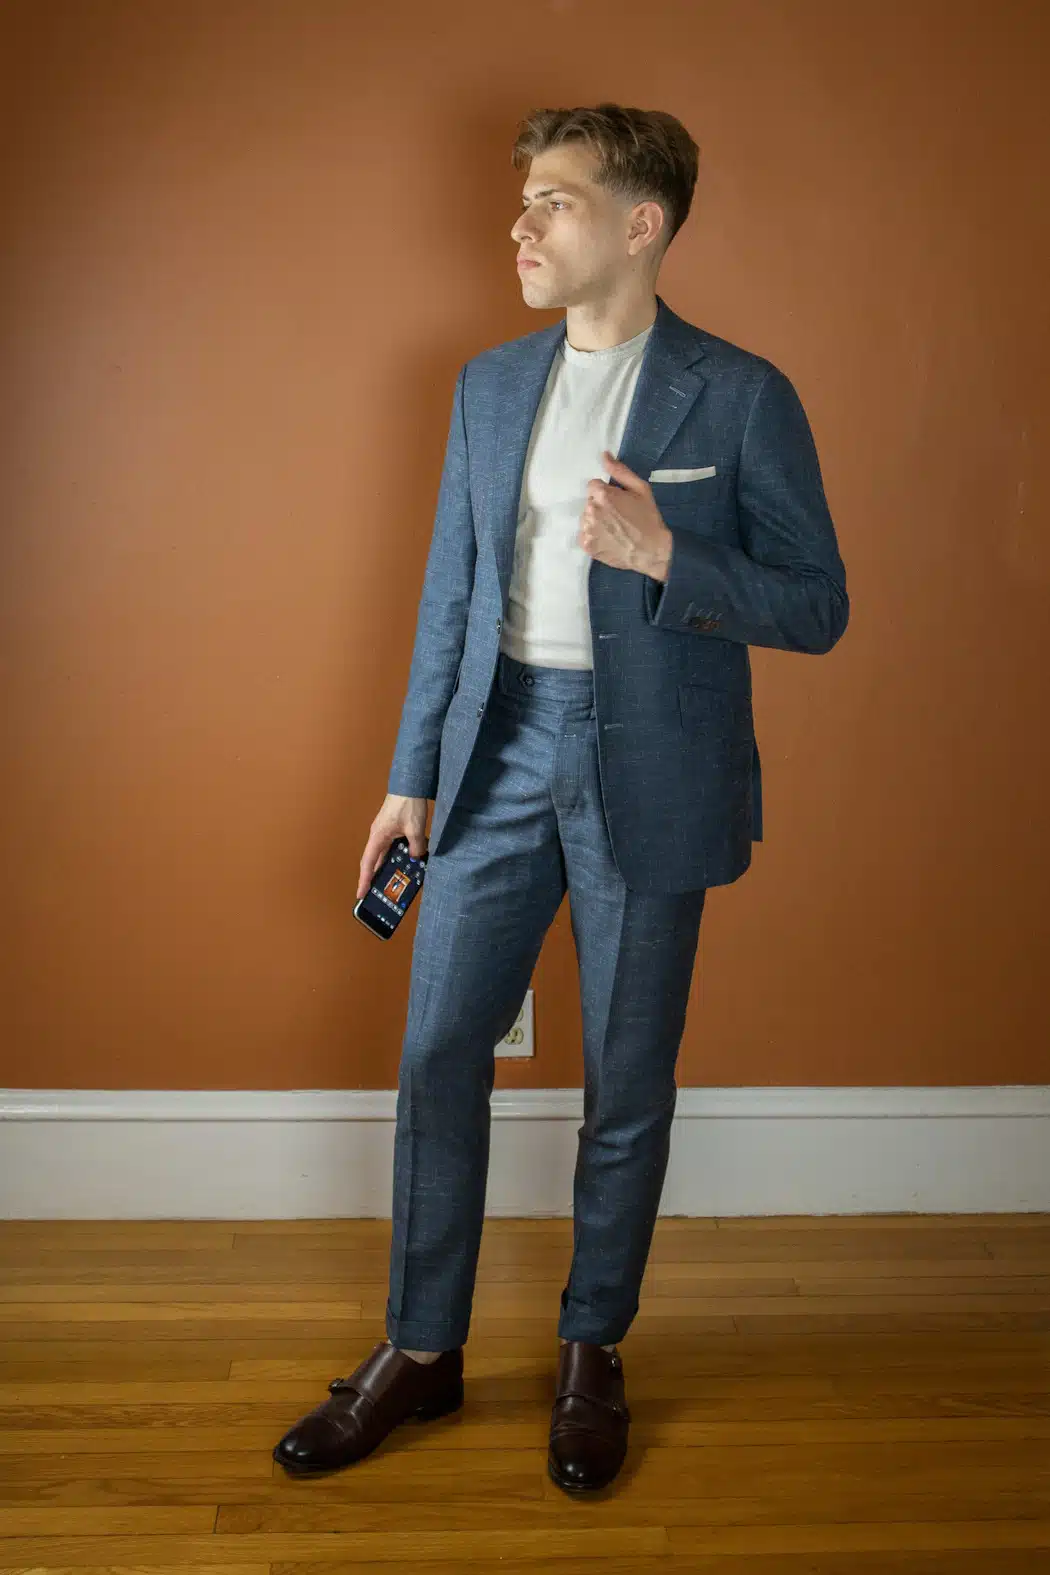 Ryan Wearing Thursday Boot Co Saint Double Monk with a suit